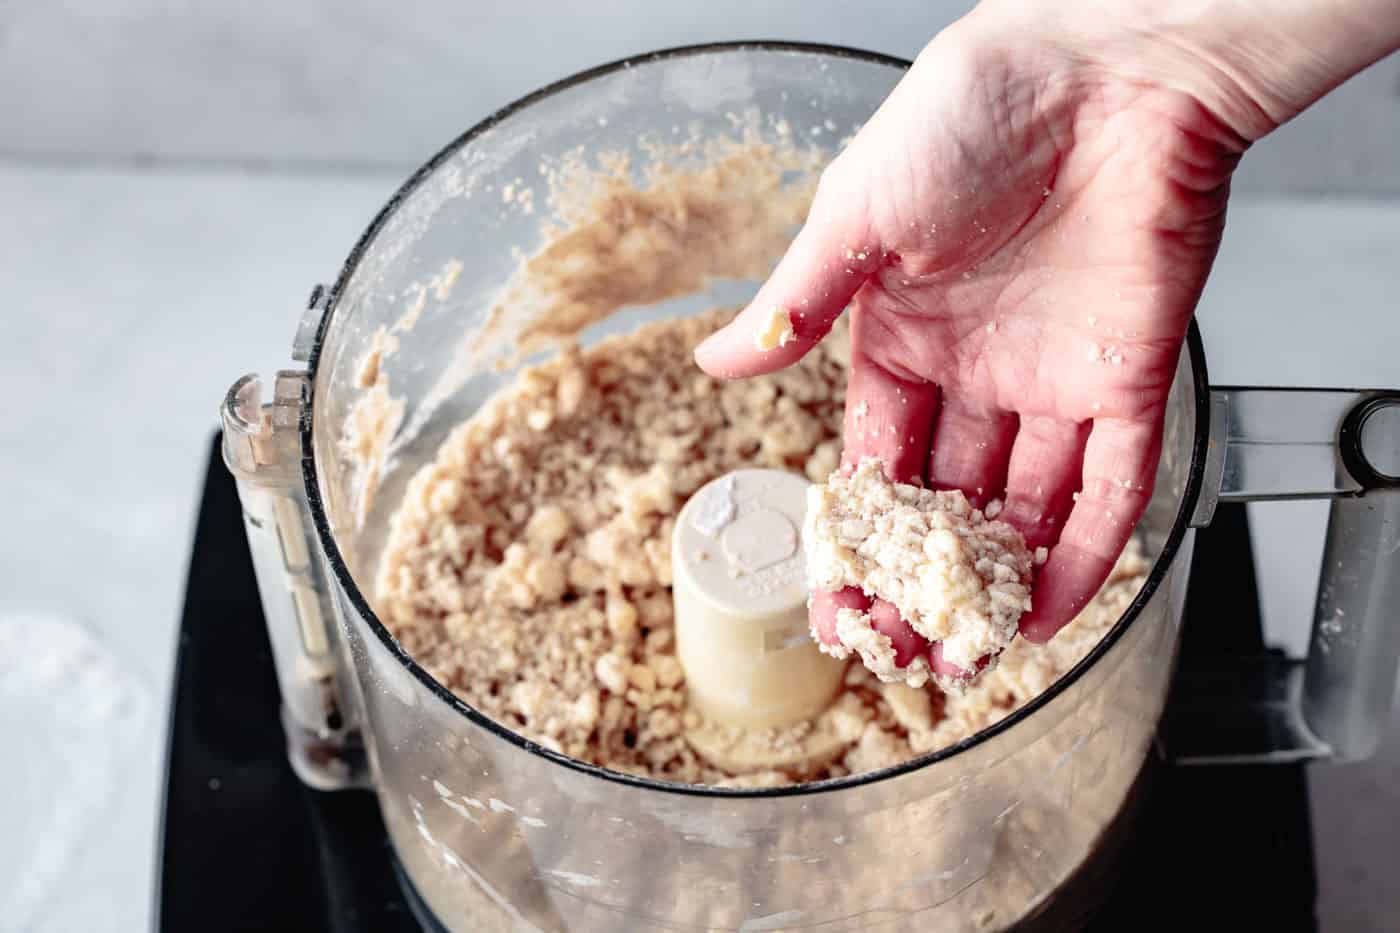 squeezing the paleo pie crust dough to determine hydration